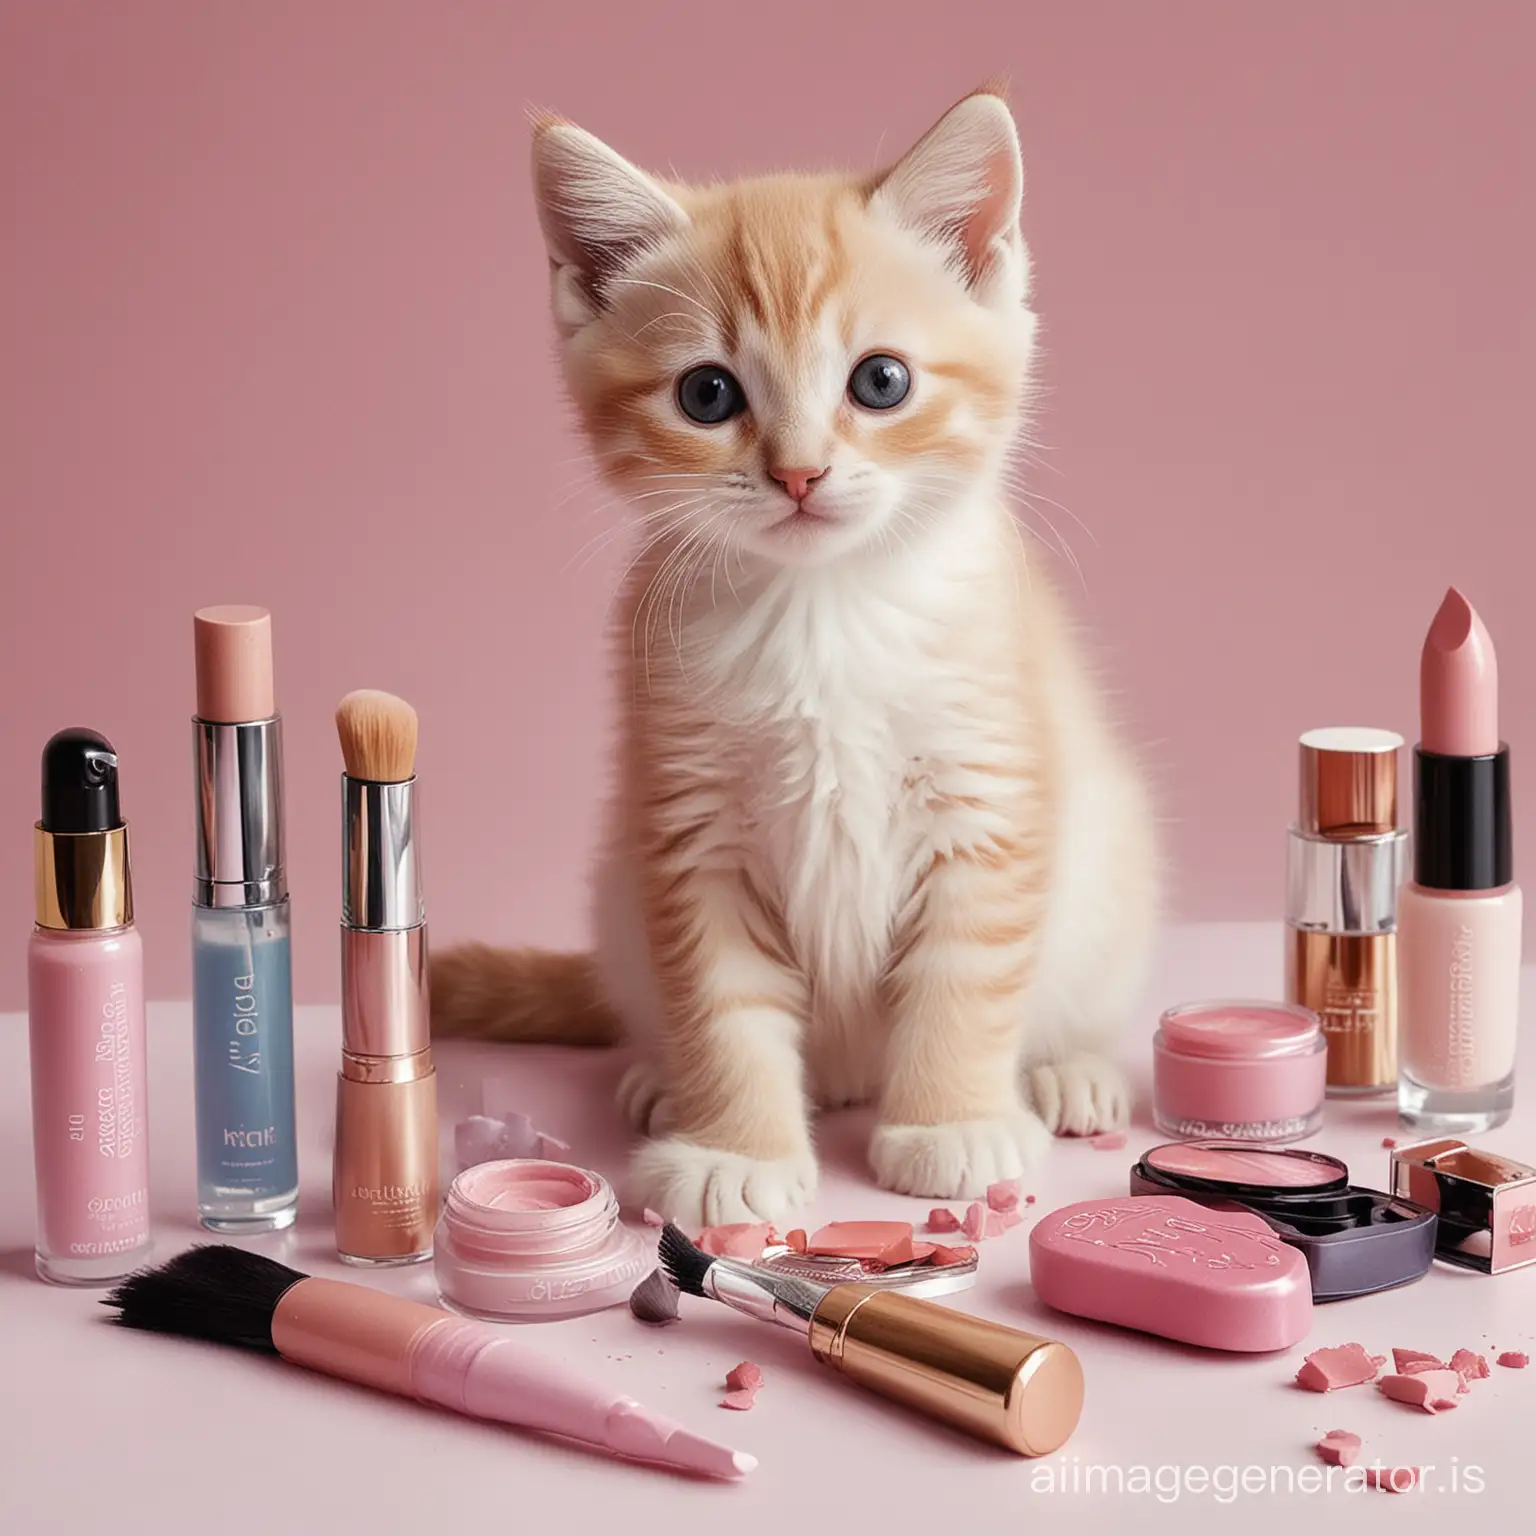 Adorable-Kitten-Playing-with-Makeup-Brushes